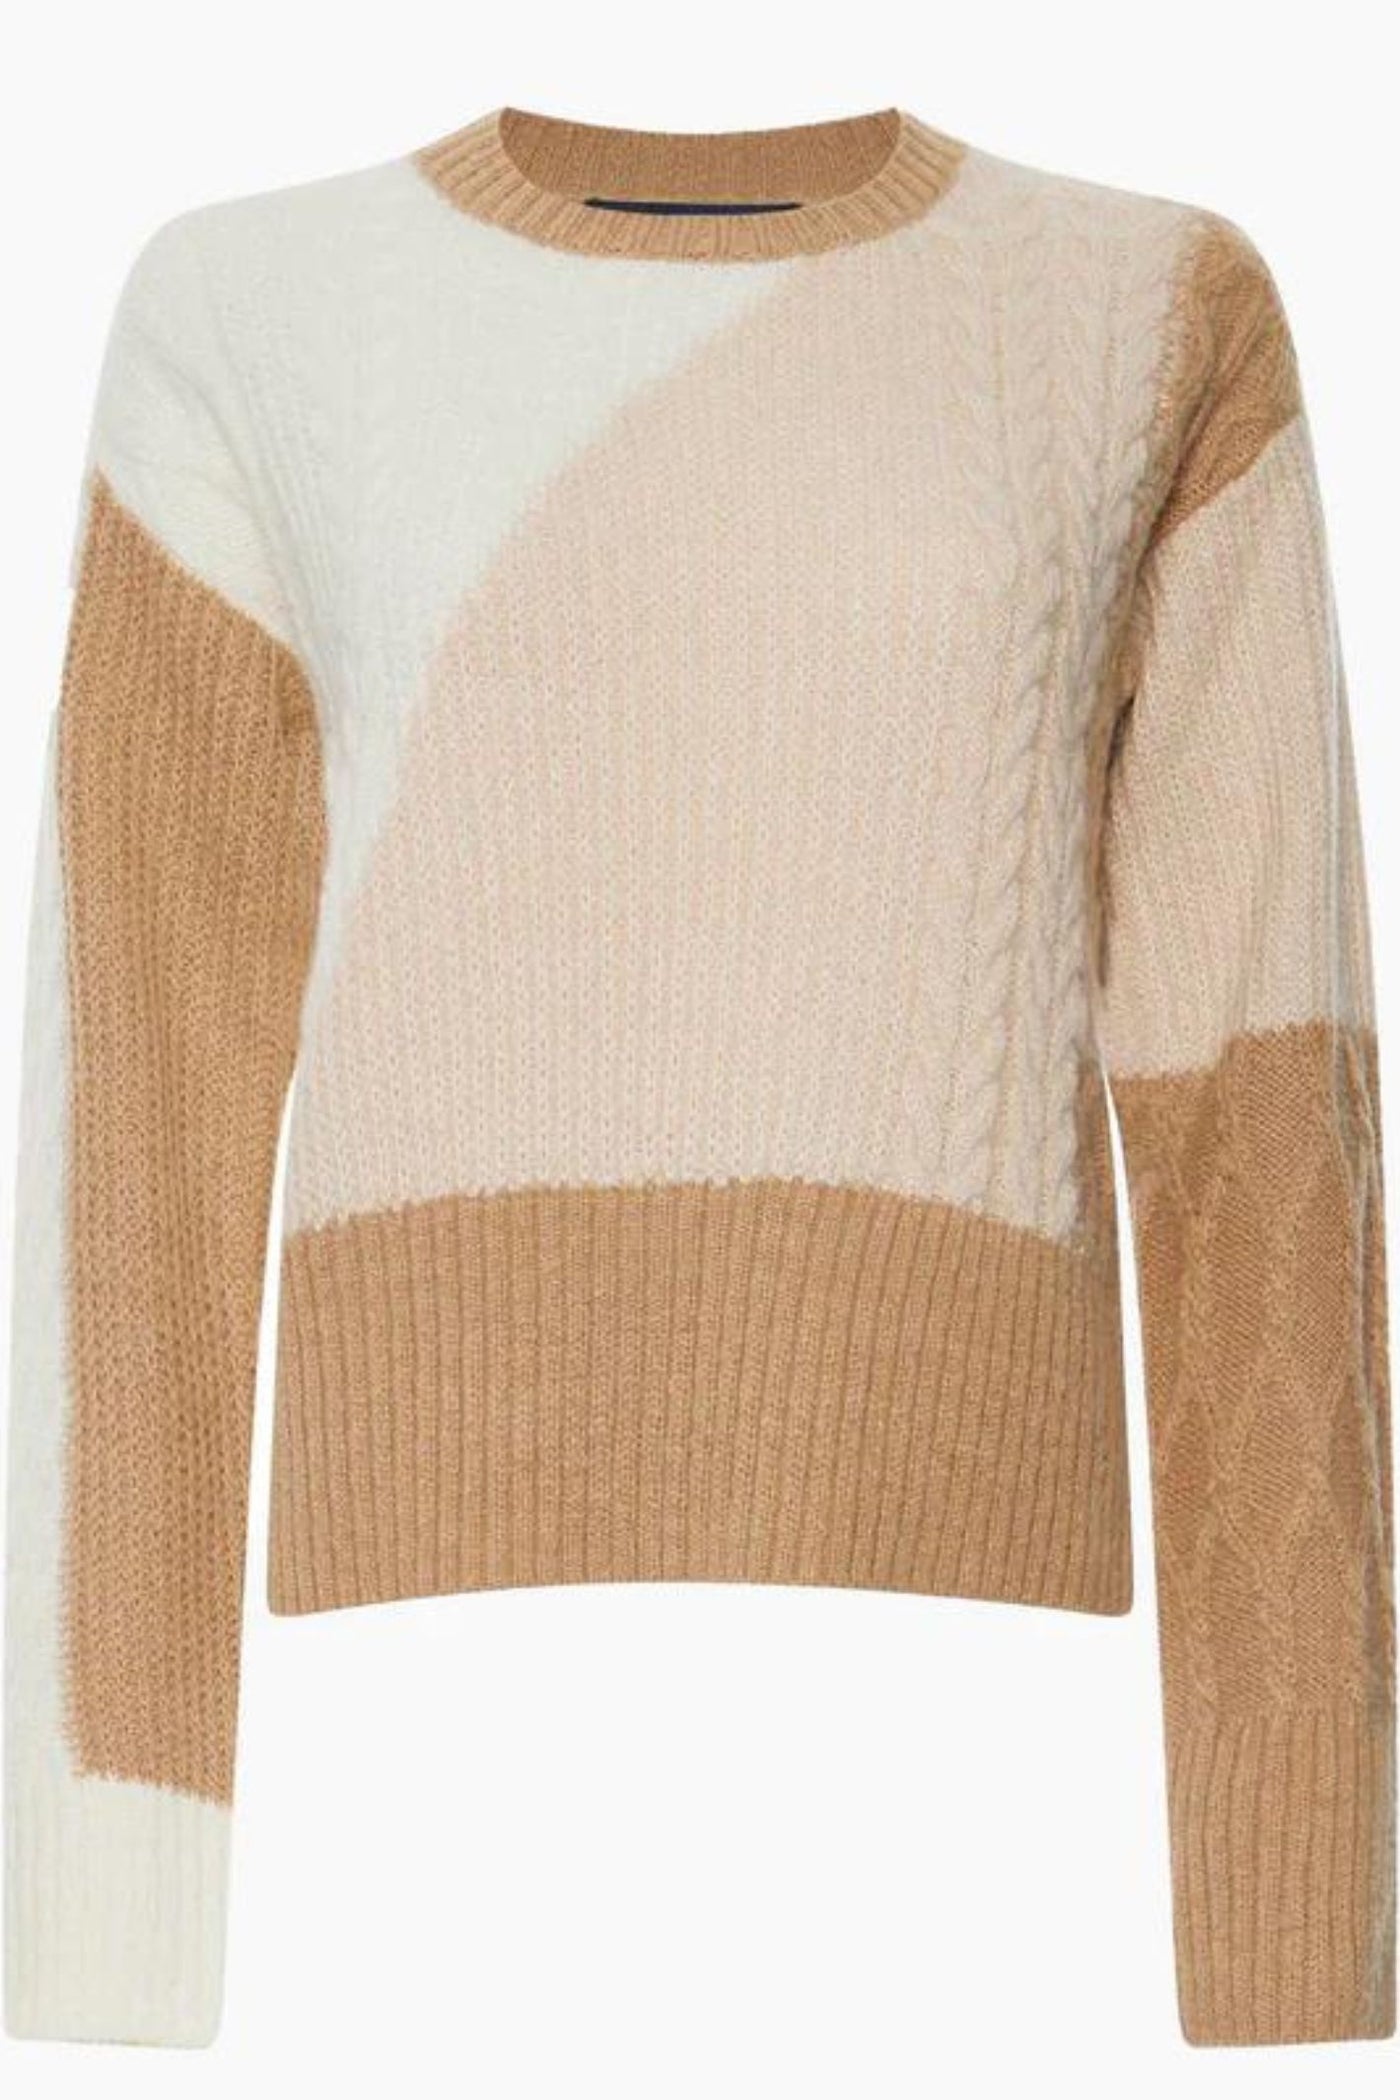 French Connection 78TBK Madelyn Cable Knit Jumper | Jezabel Boutique